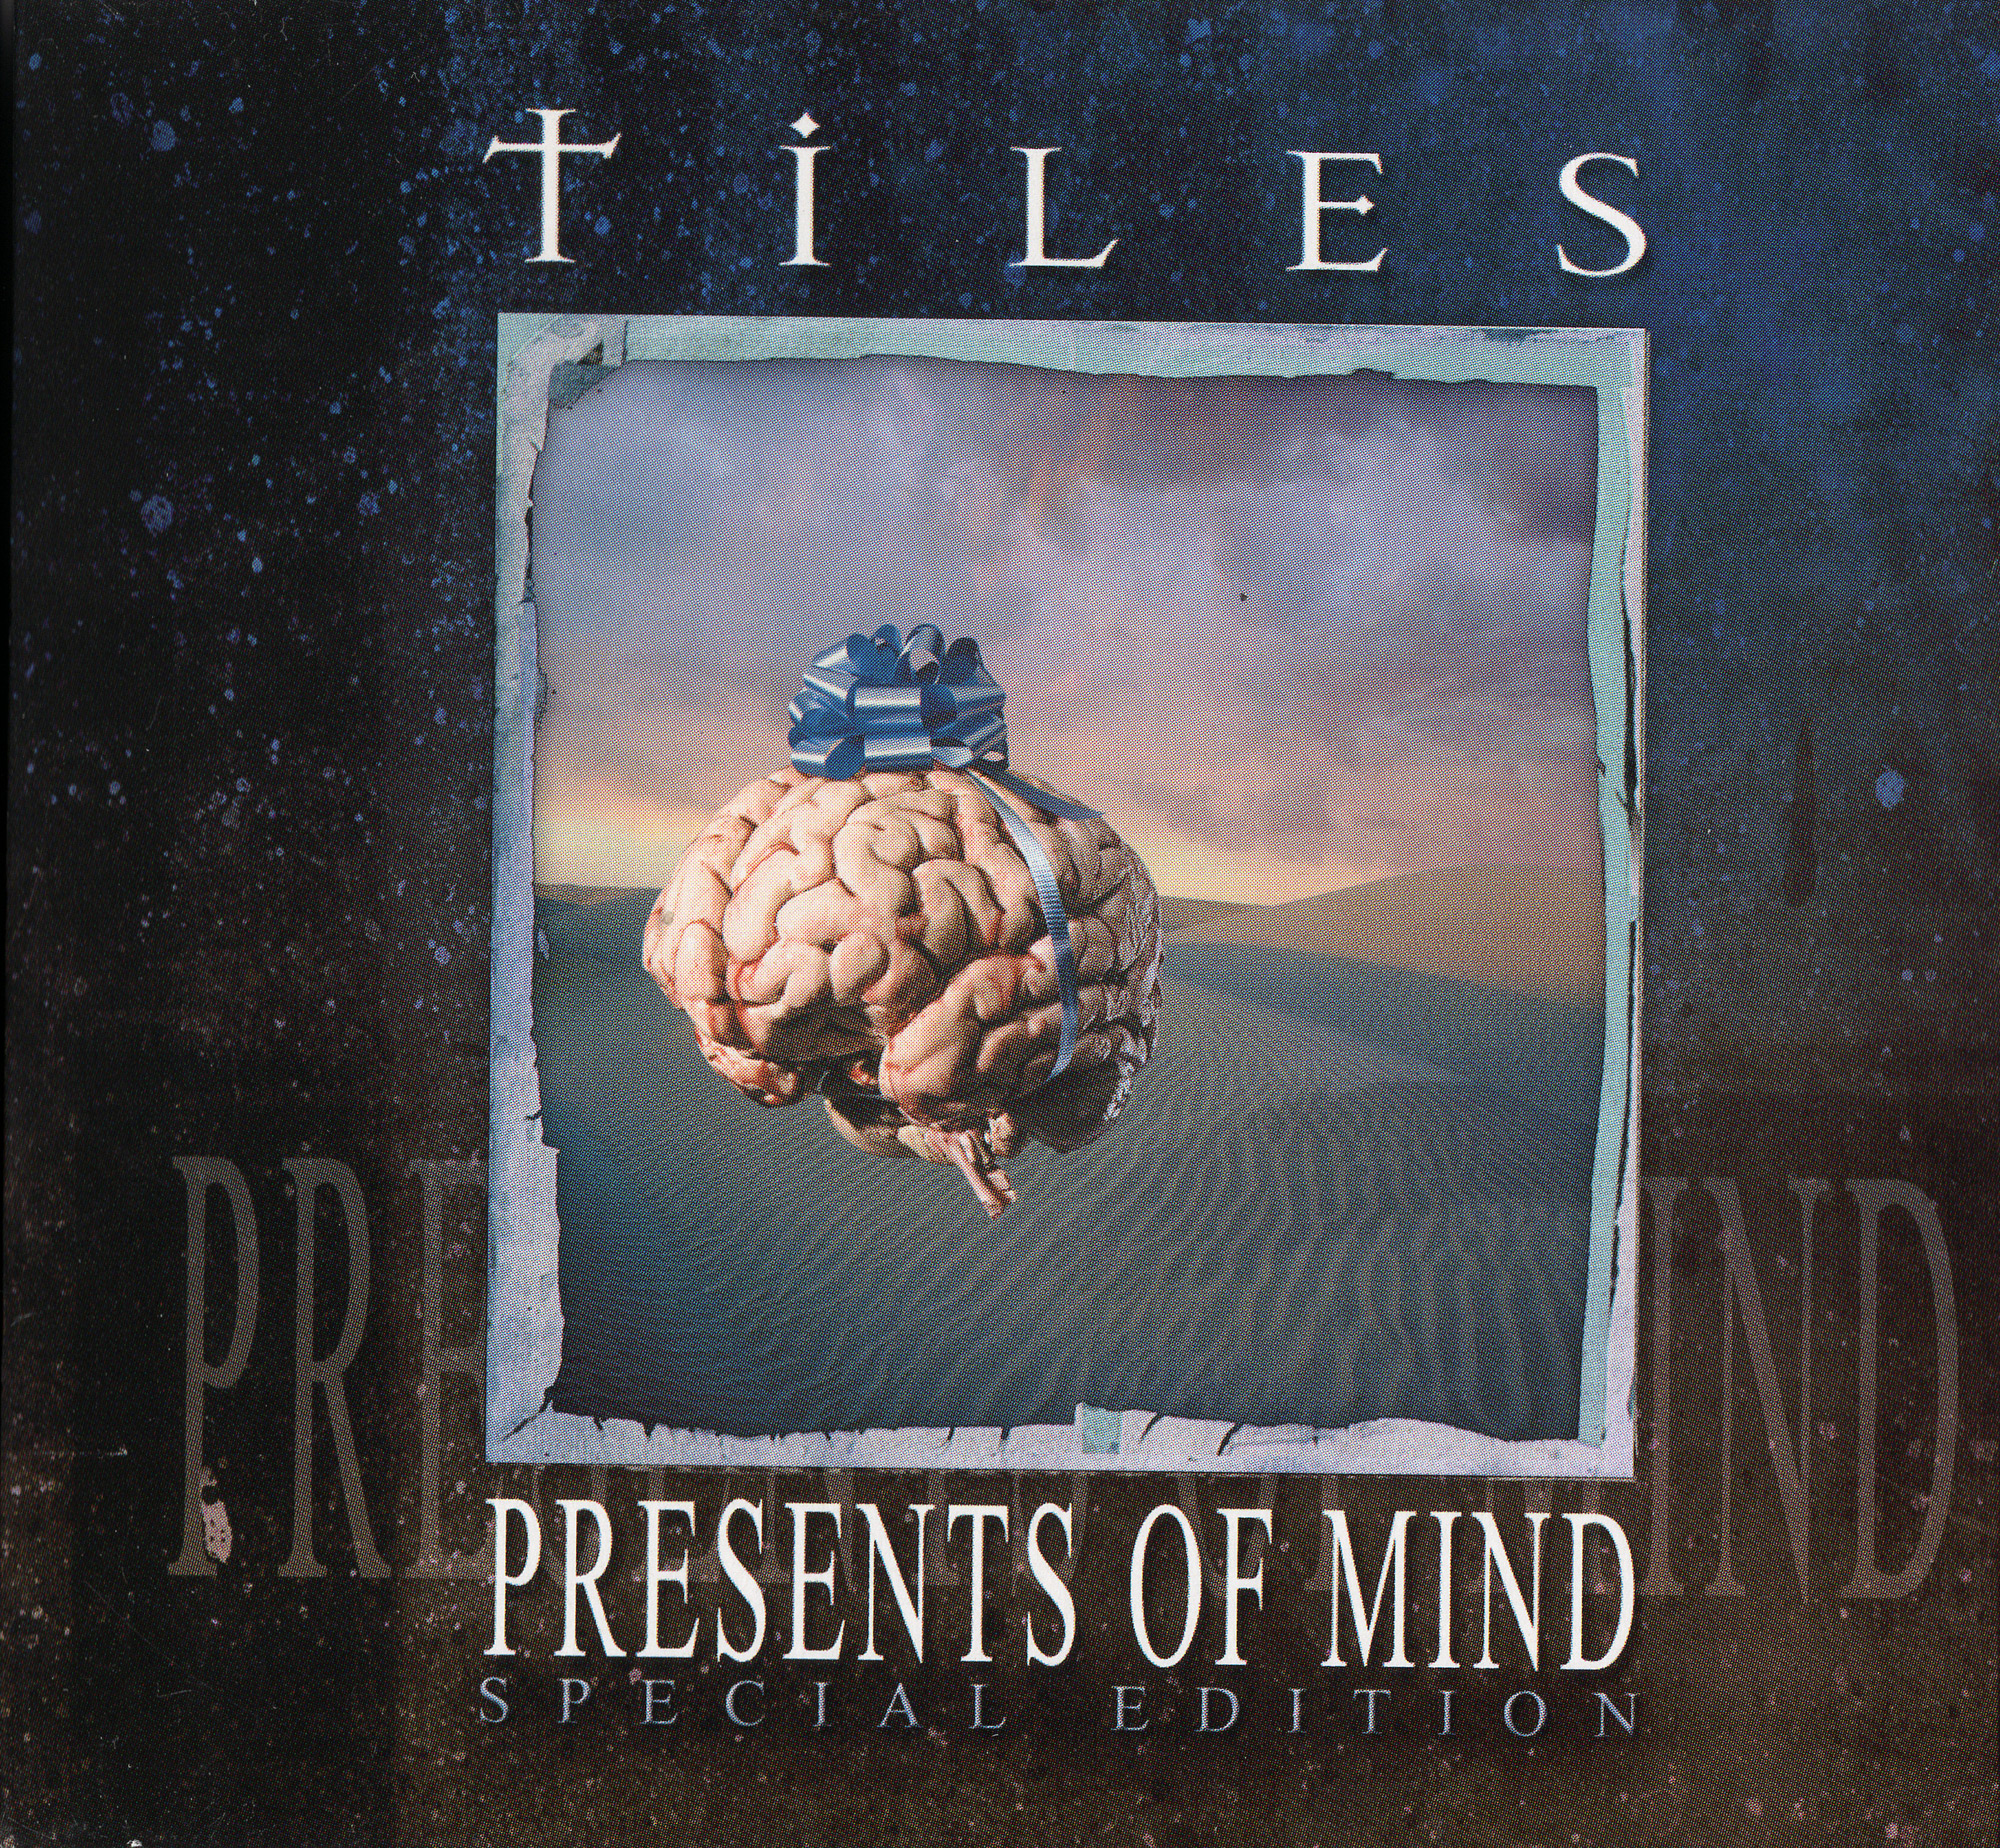 Mind special 18. Tiles 1999 - presents of Mind. -Presence-of-Mind. Треклист альбома. Dream Theater albums.